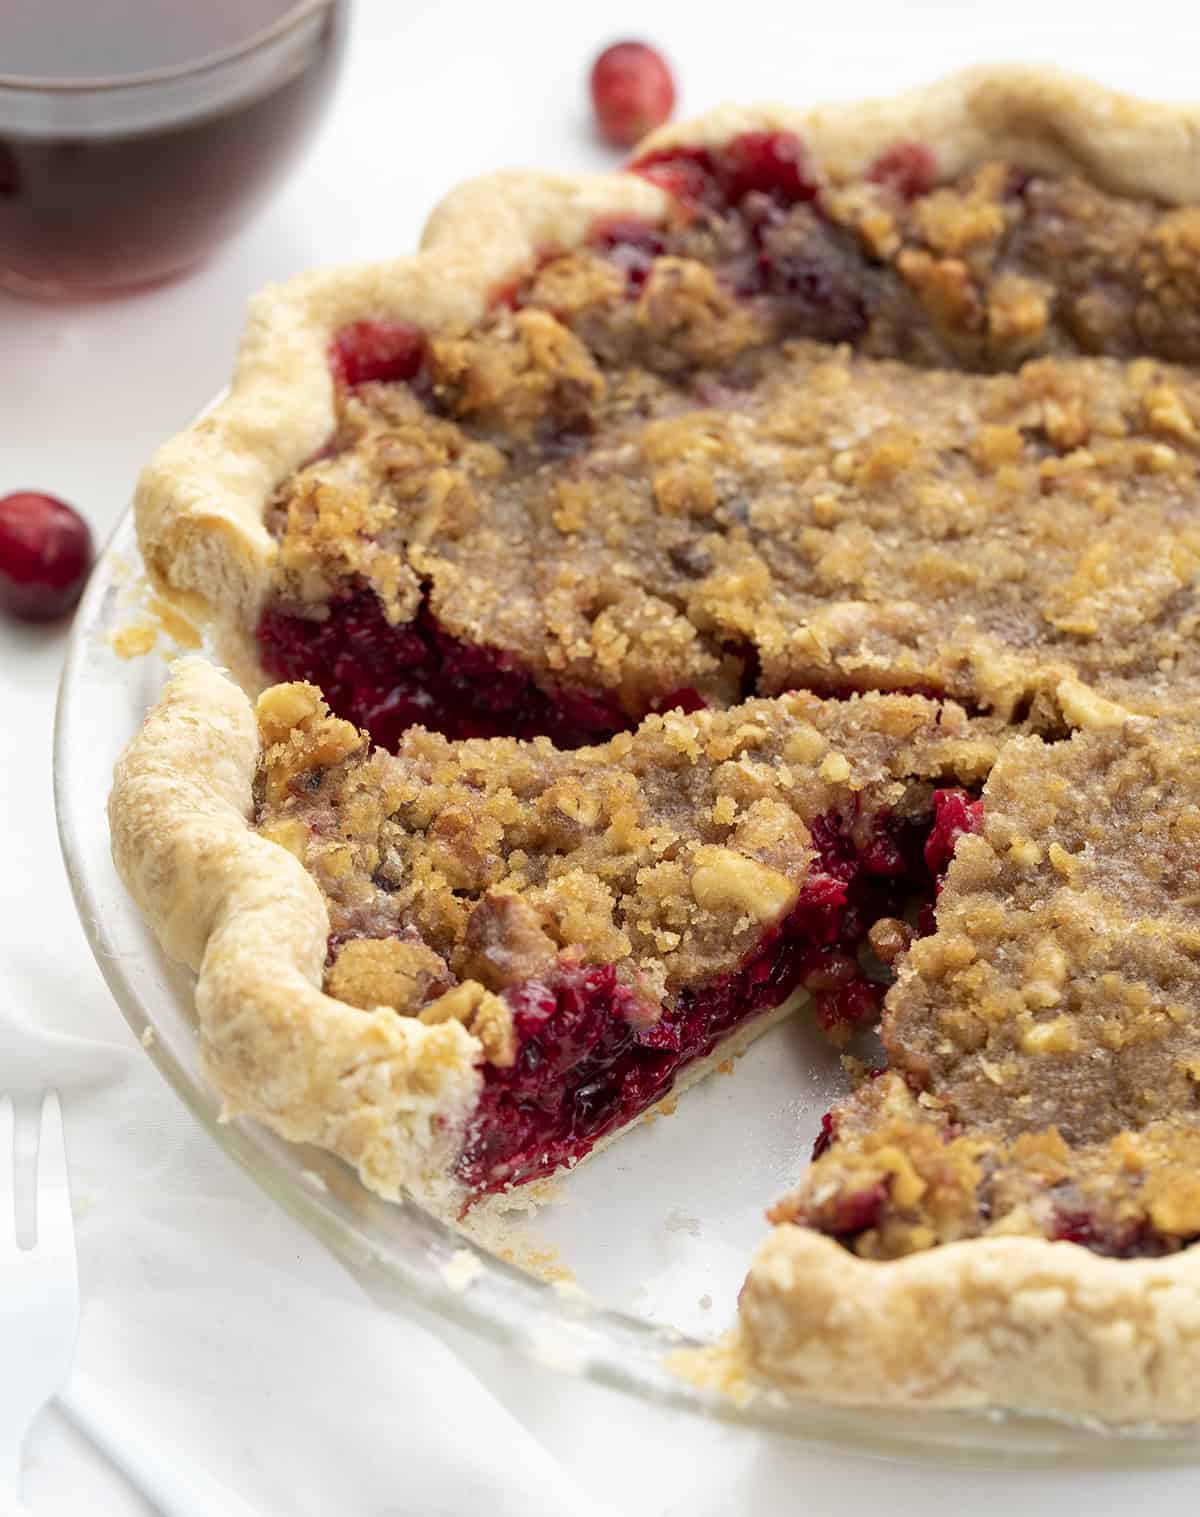 Cranberry Pie With a Piece Cut Out